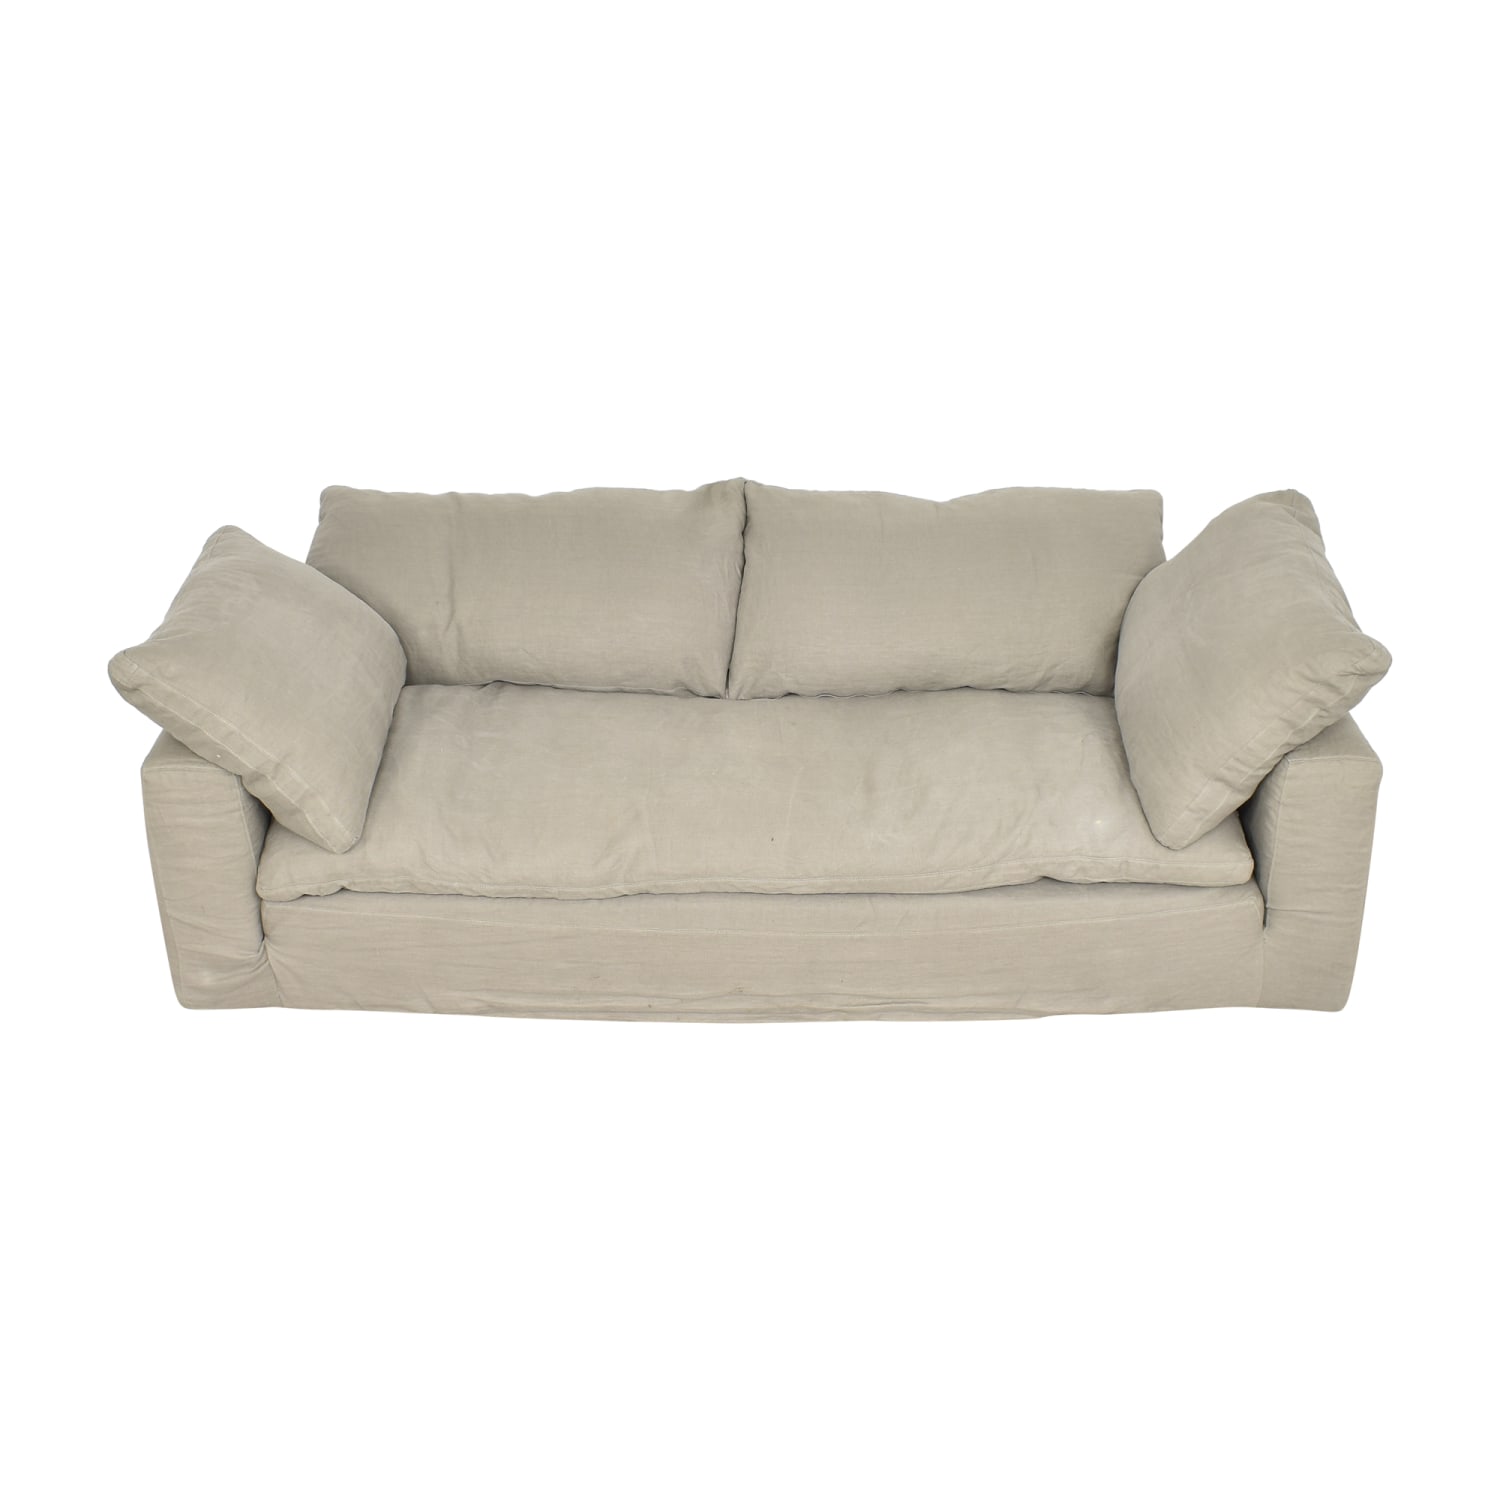 https://res.cloudinary.com/dkqtxtobb/image/upload/f_auto,q_auto:best,w_1500/product-assets/458721/restoration-hardware/sofas/classic-sofas/restoration-hardware-cloud-bench-seat-sofa-used.jpeg